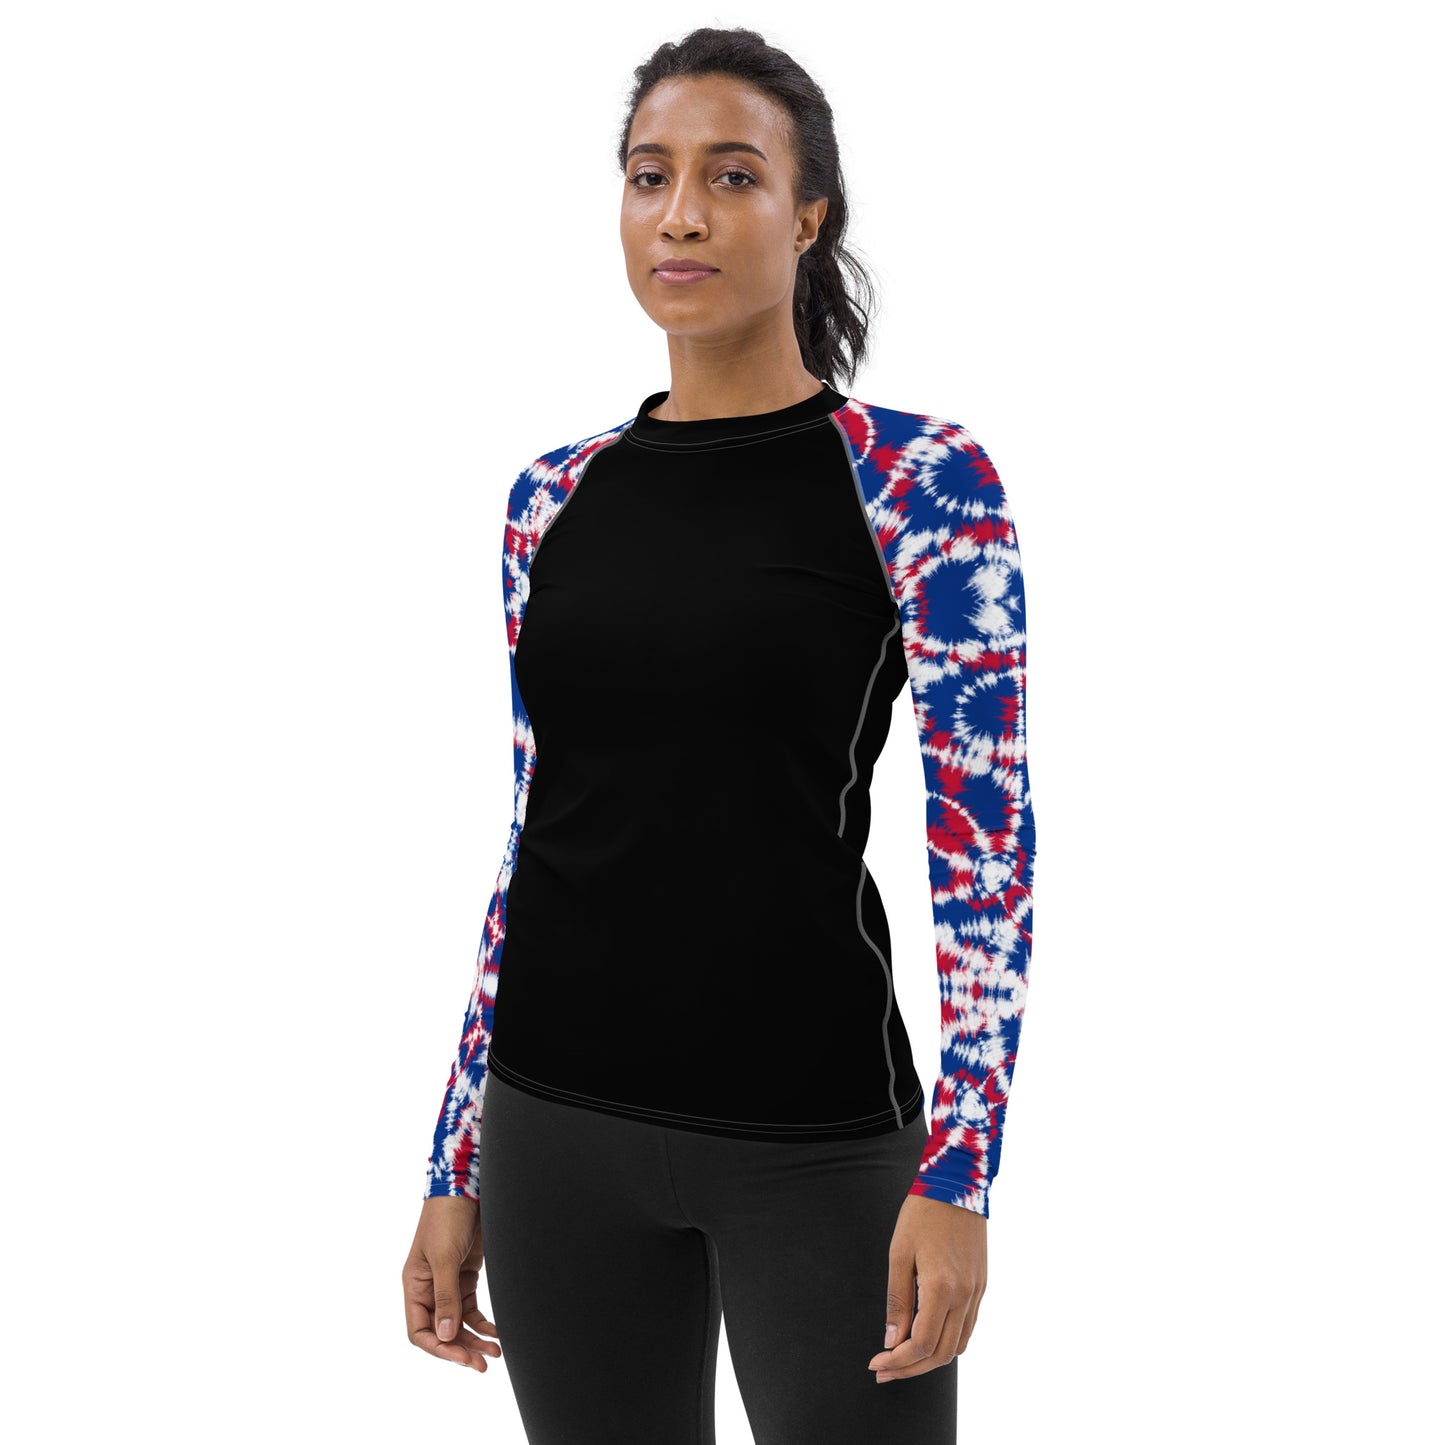 Batik - Red, White, and Blue Sleeves and Black Body - Women's Rash Guard